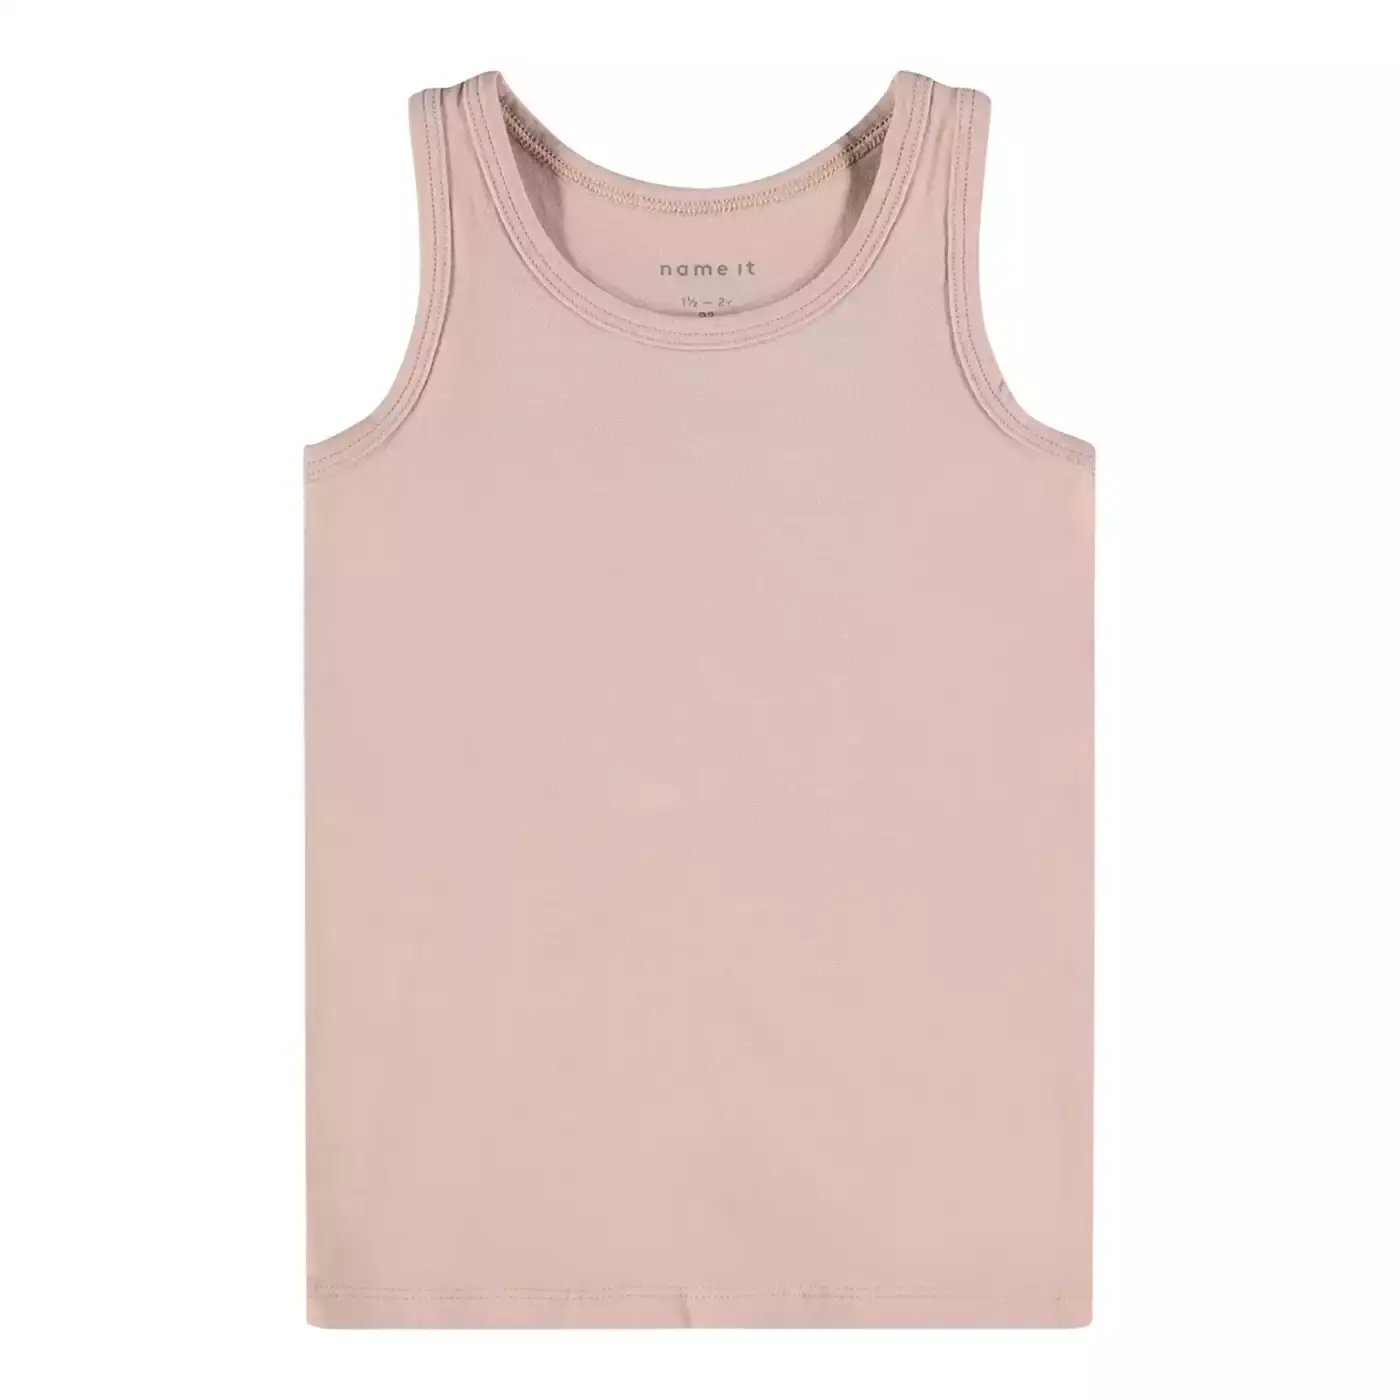 2er-Pack Tank Top Purple name it Pink Rosa Lila M2009580517005 5